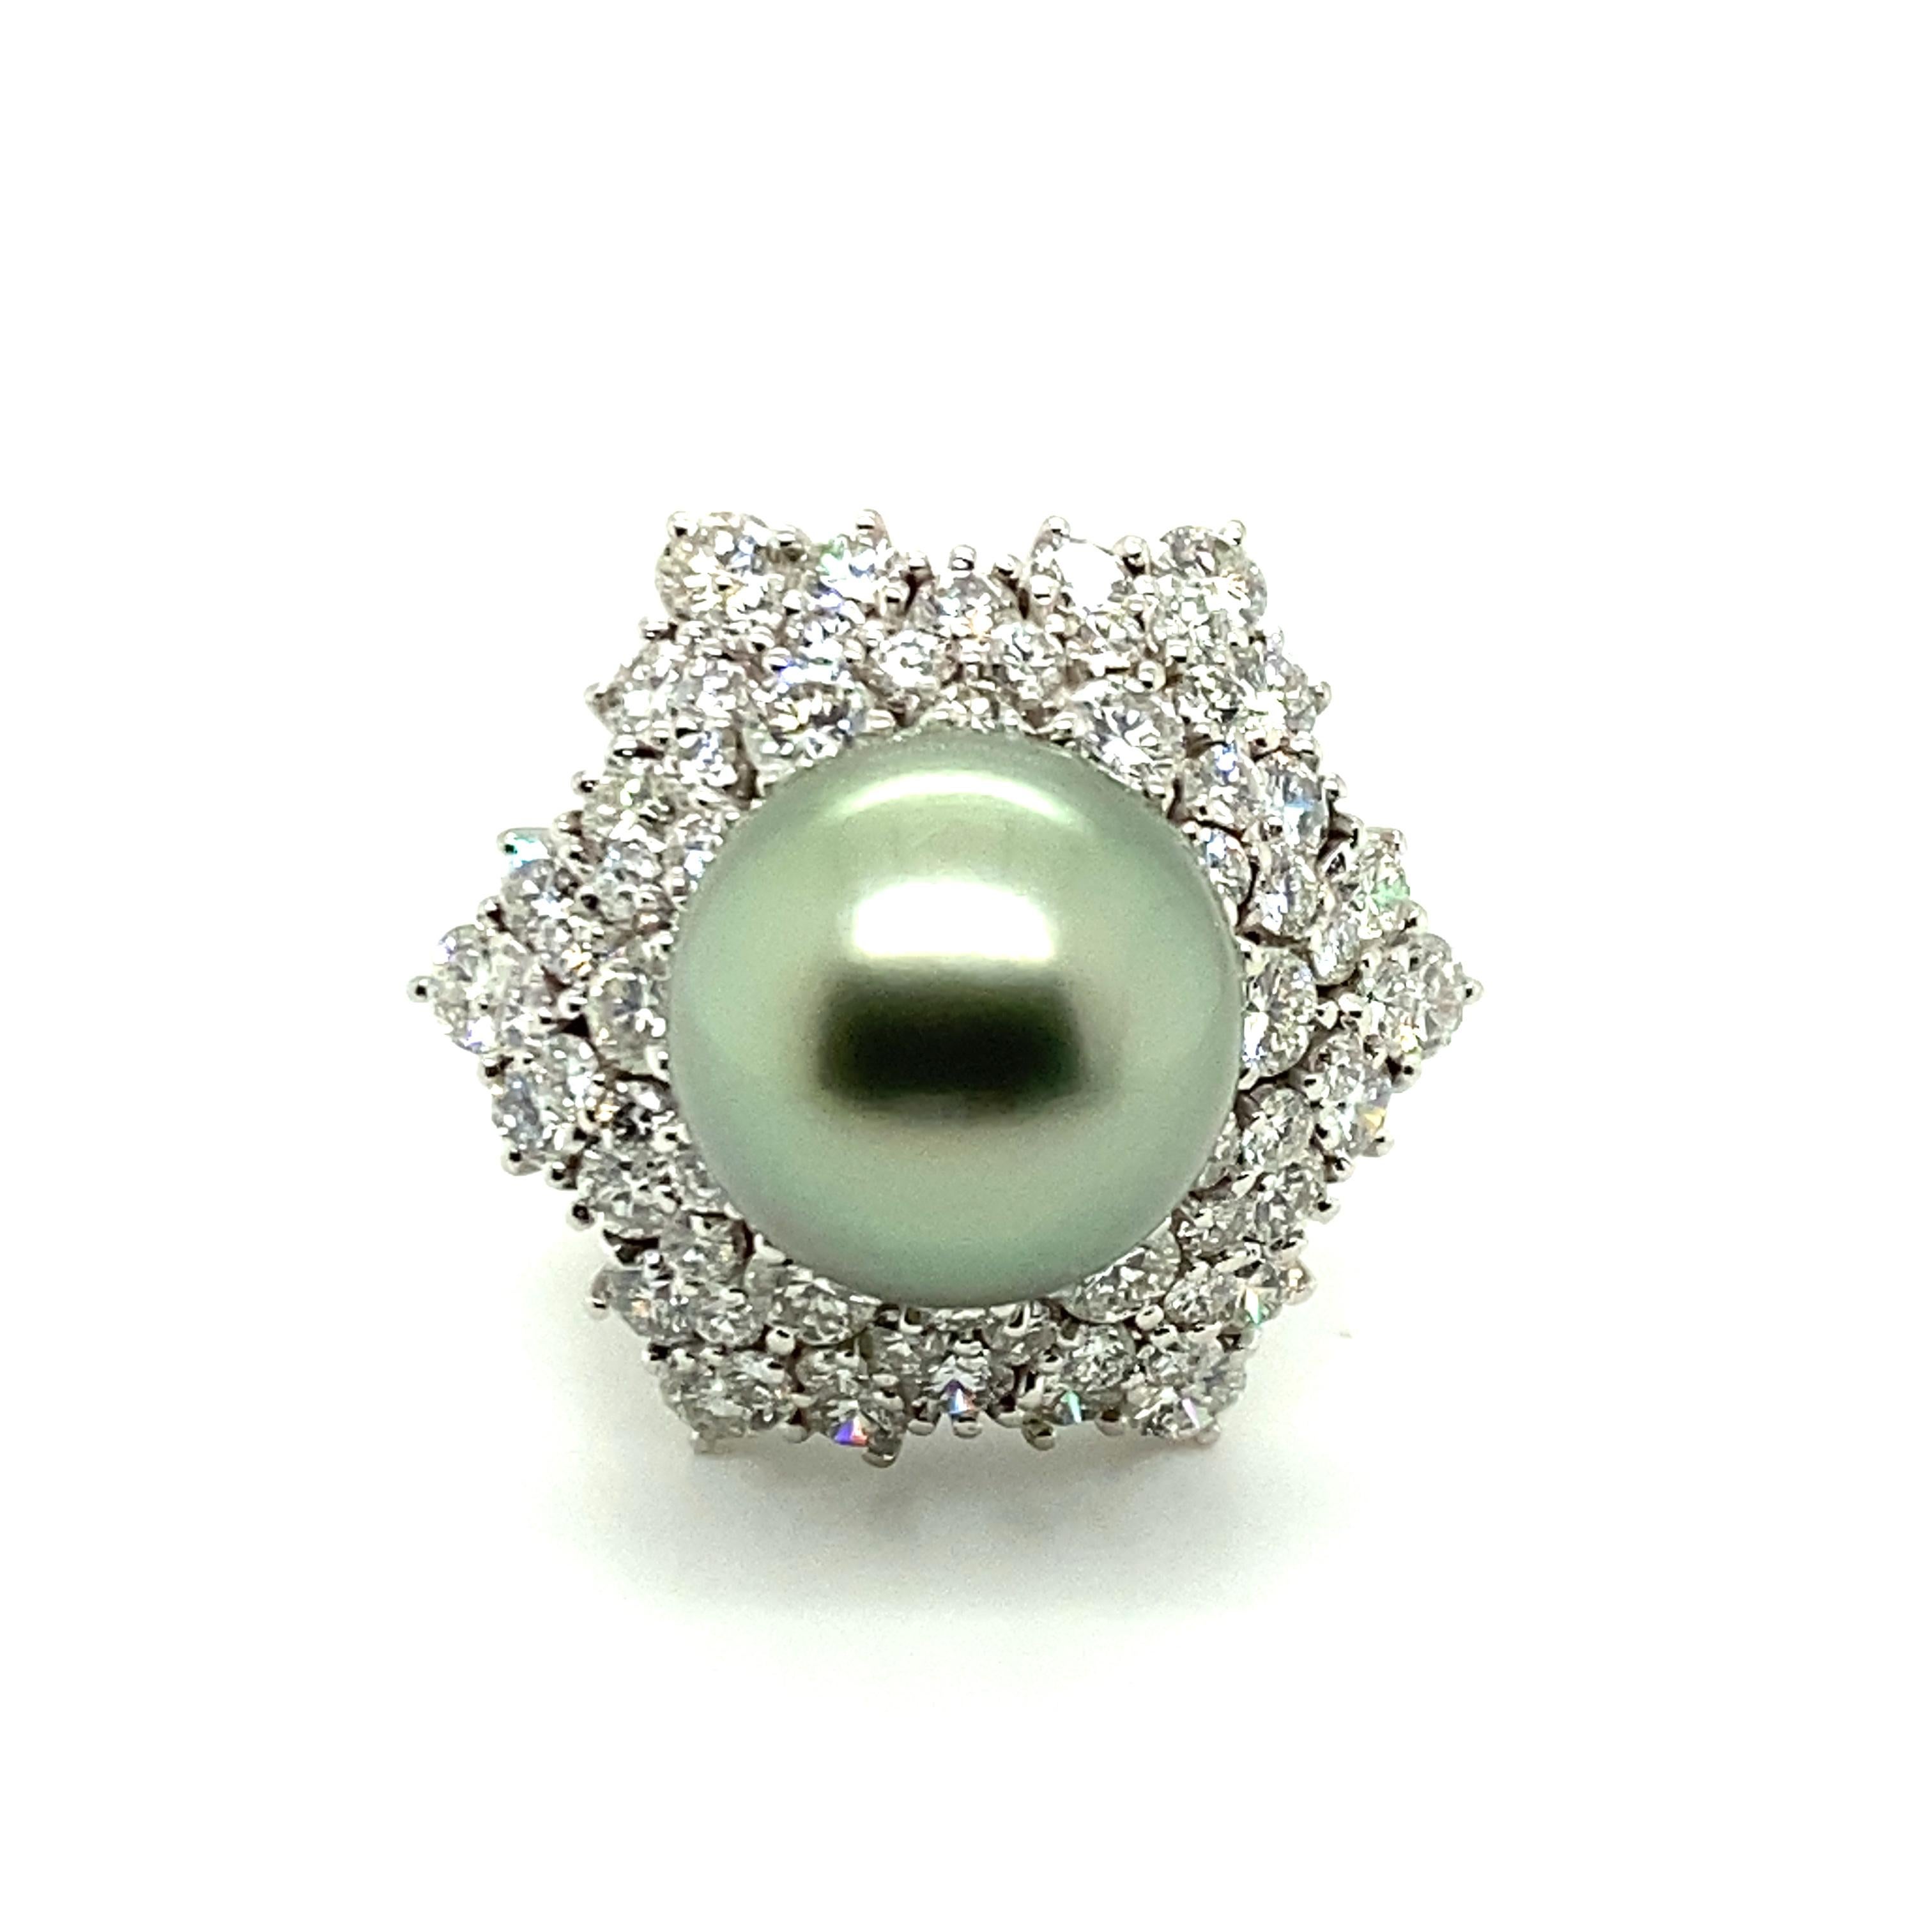 This beautiful ring in platinum 950 features a fine Tahitian cultured pearl of 14.0 mm in diameter. Round and clean, this mesmerising cultured pearl shows a unique pistache color with a soft shimmer. 
The star-shaped entourage is set with 68